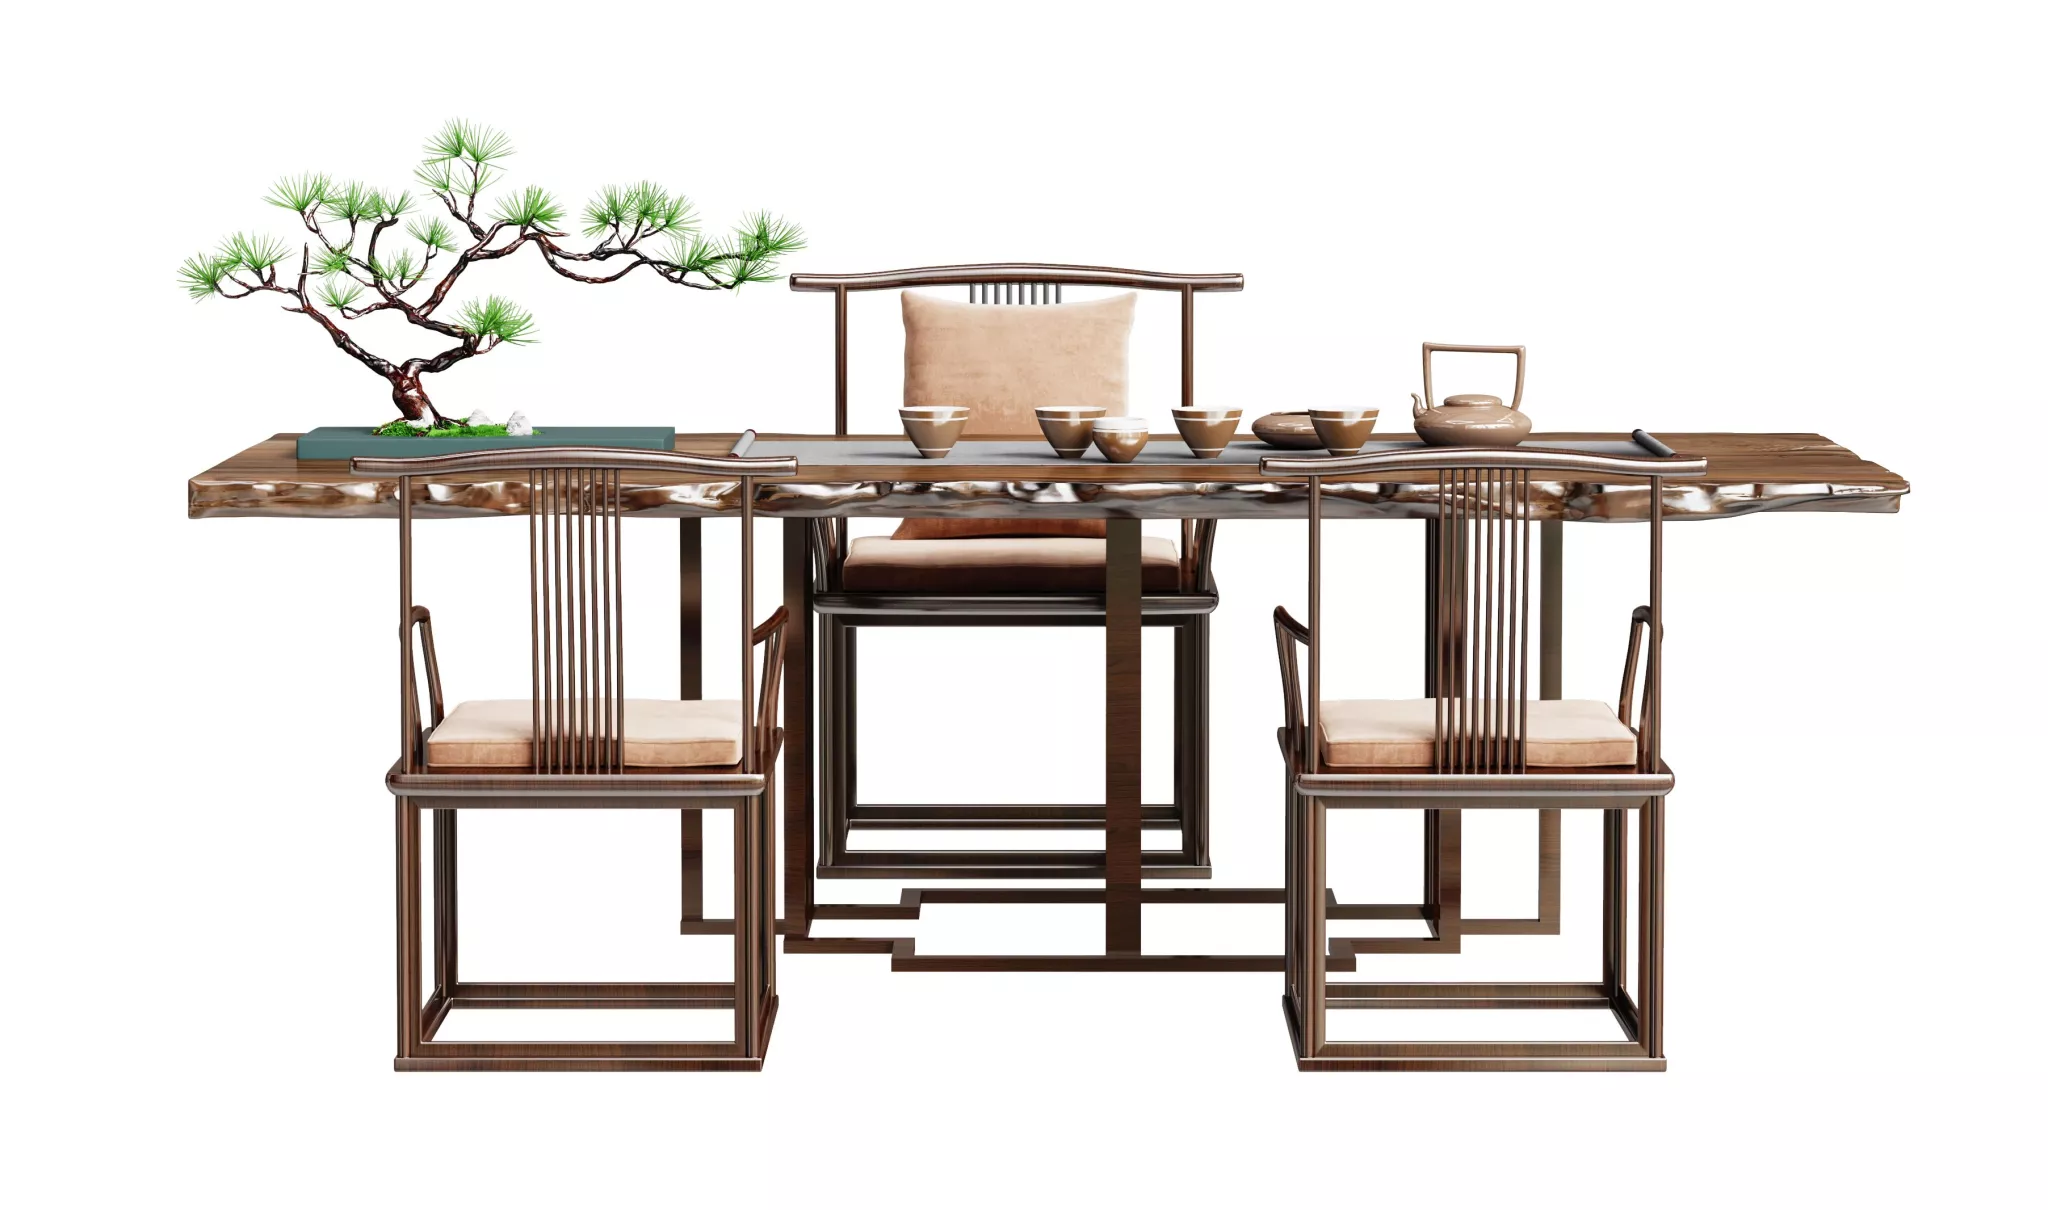 CHINESE TEA TABLE SET - SKETCHUP 3D MODEL - VRAY - 243319